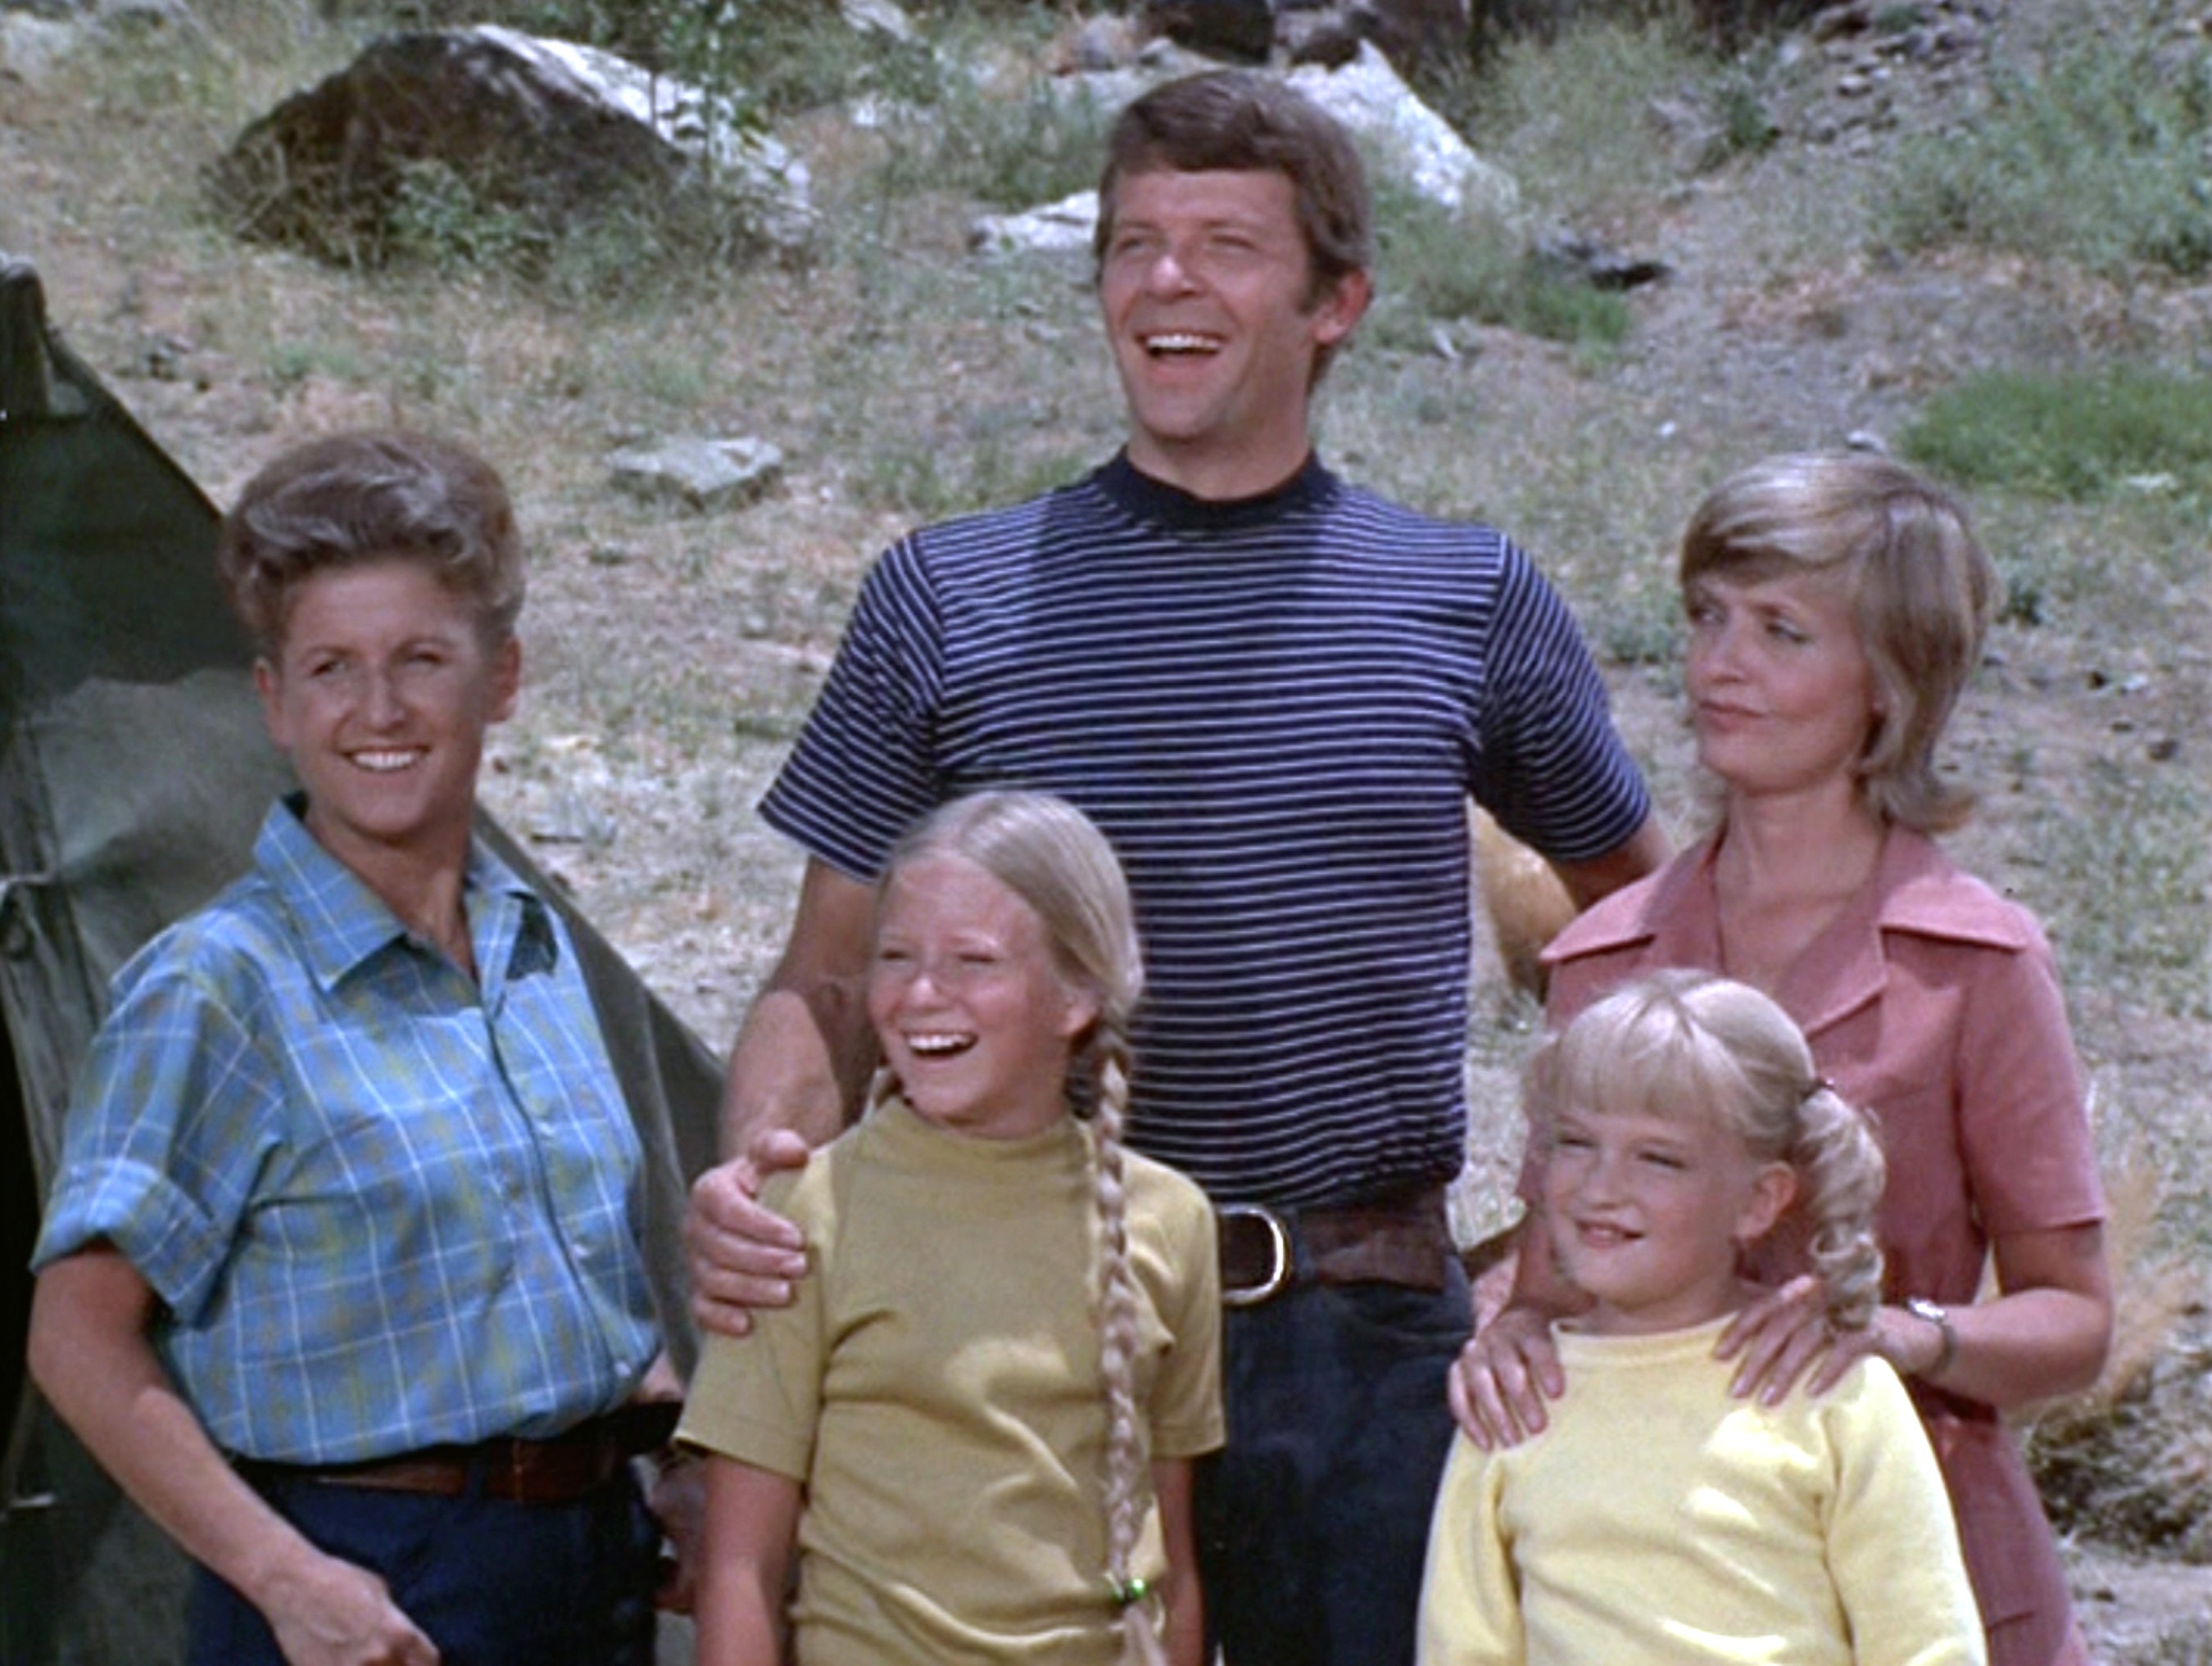 Ann B. Davis, Eve Plumb, Robert Reed, Susan Olsen and Florence Henderson as Alice Nelson, Jan, Mike, Cindy, and Carol Brady in "The Brady Bunch" in 1971 | Source: Getty Images